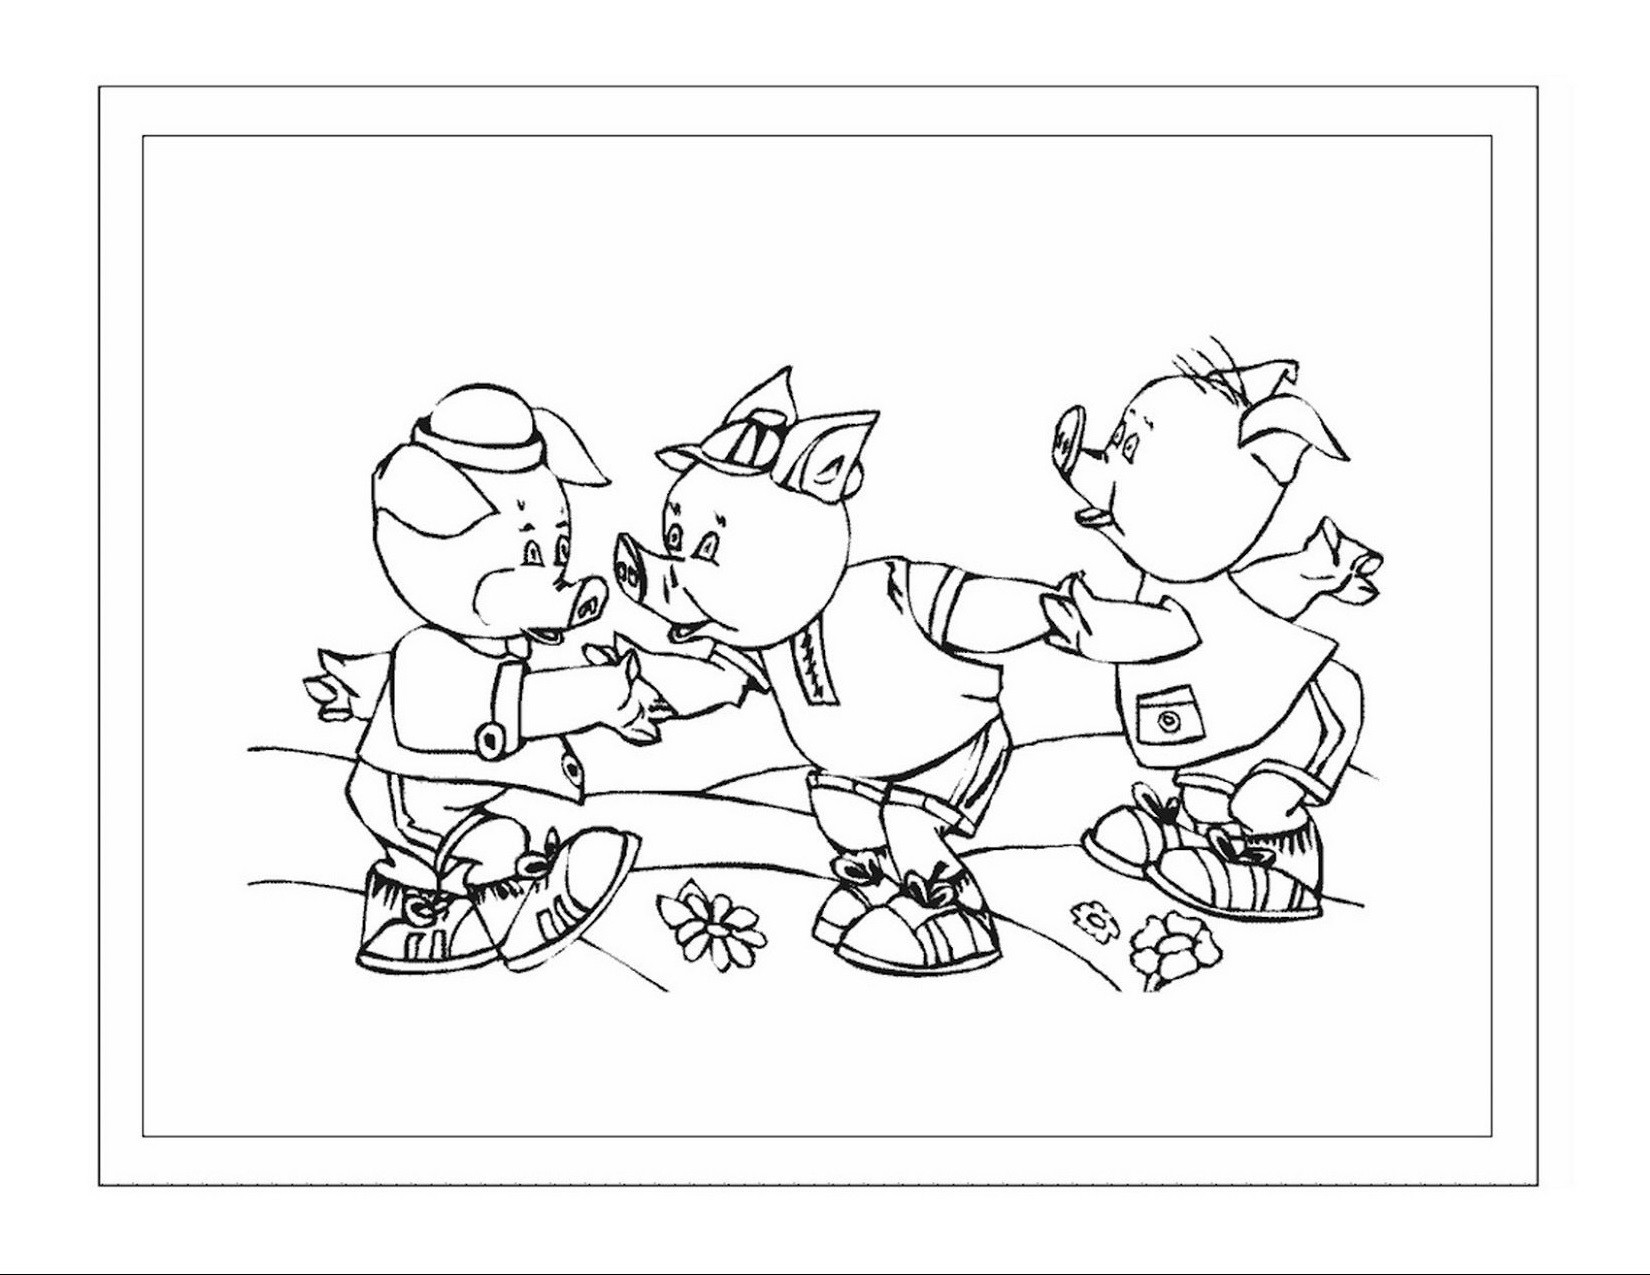 Preschool Coloring Sheets For The 3 Little Pigs Houses
 Three Little Pigs Coloring Pages for Preschool